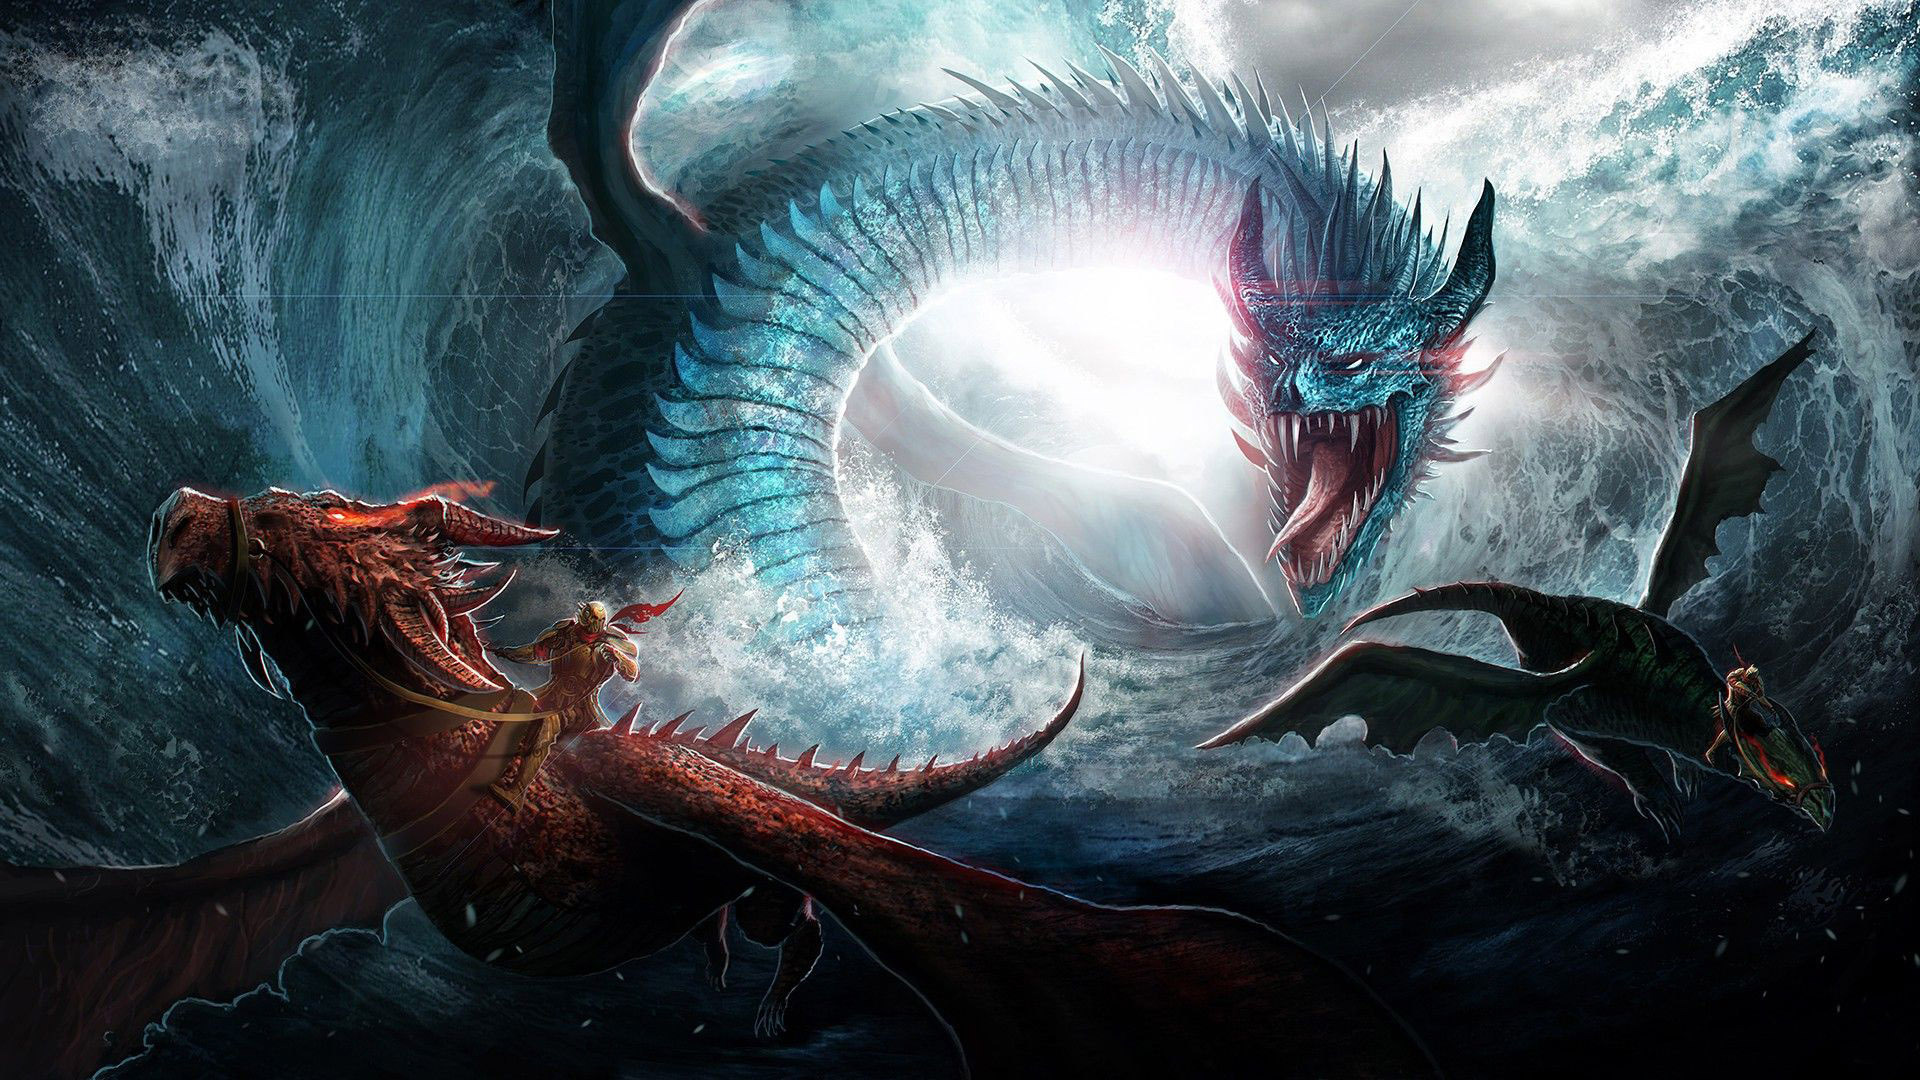 dragon wallpaper for android,dragon,cg artwork,mythology,fictional character,mythical creature